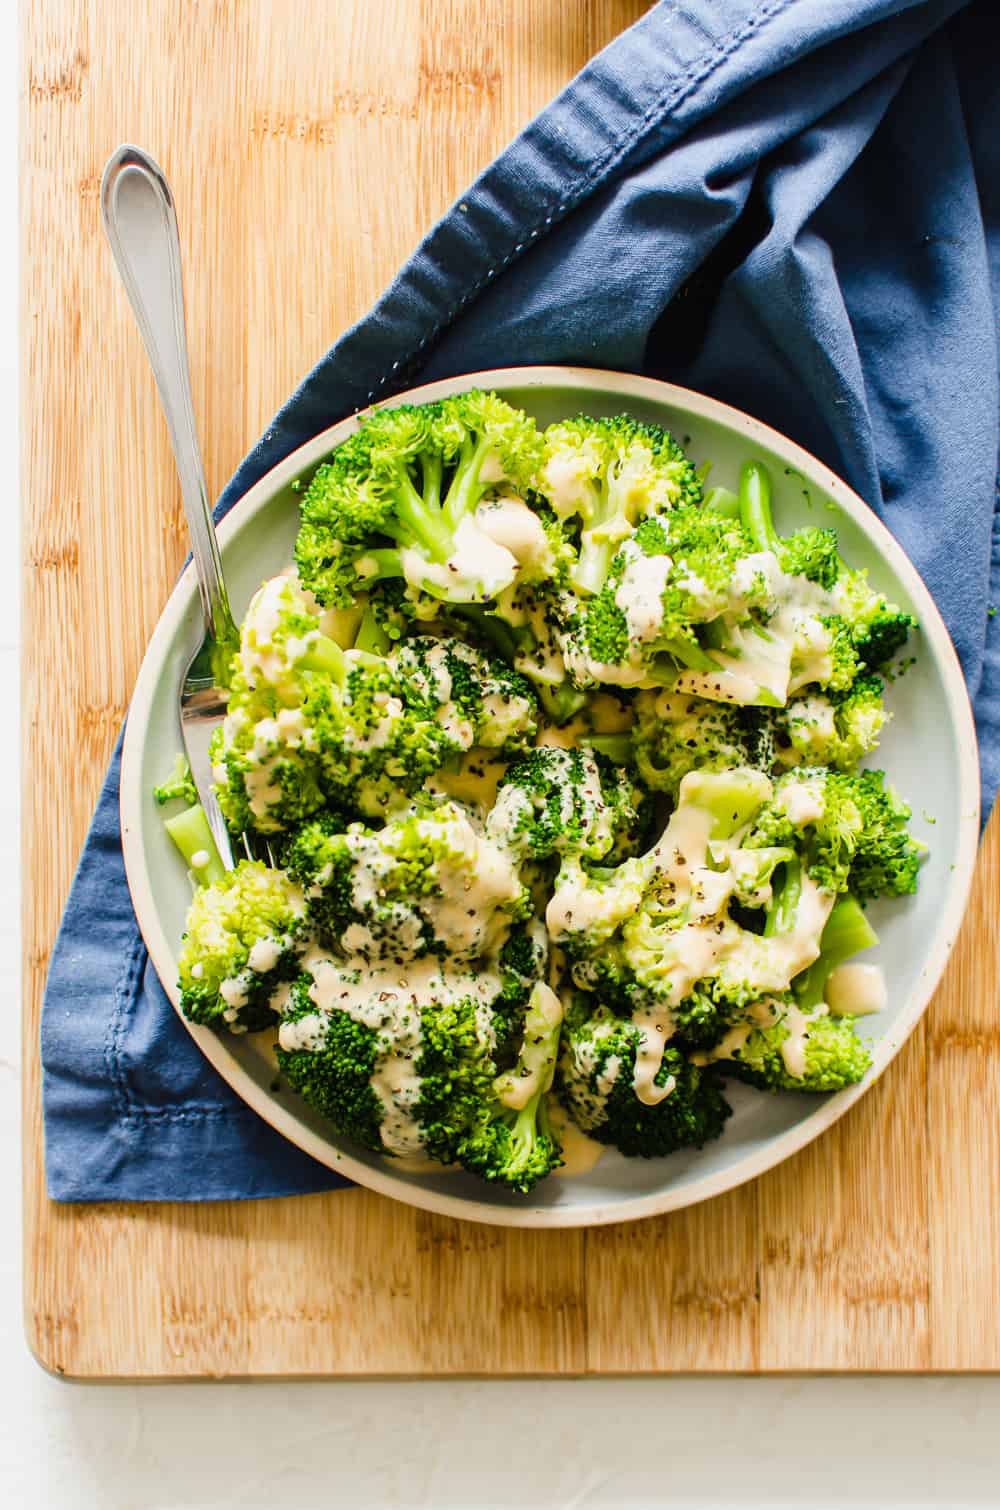 A plate of steamed broccoli with homemade cheese sauce drizzled all over it.